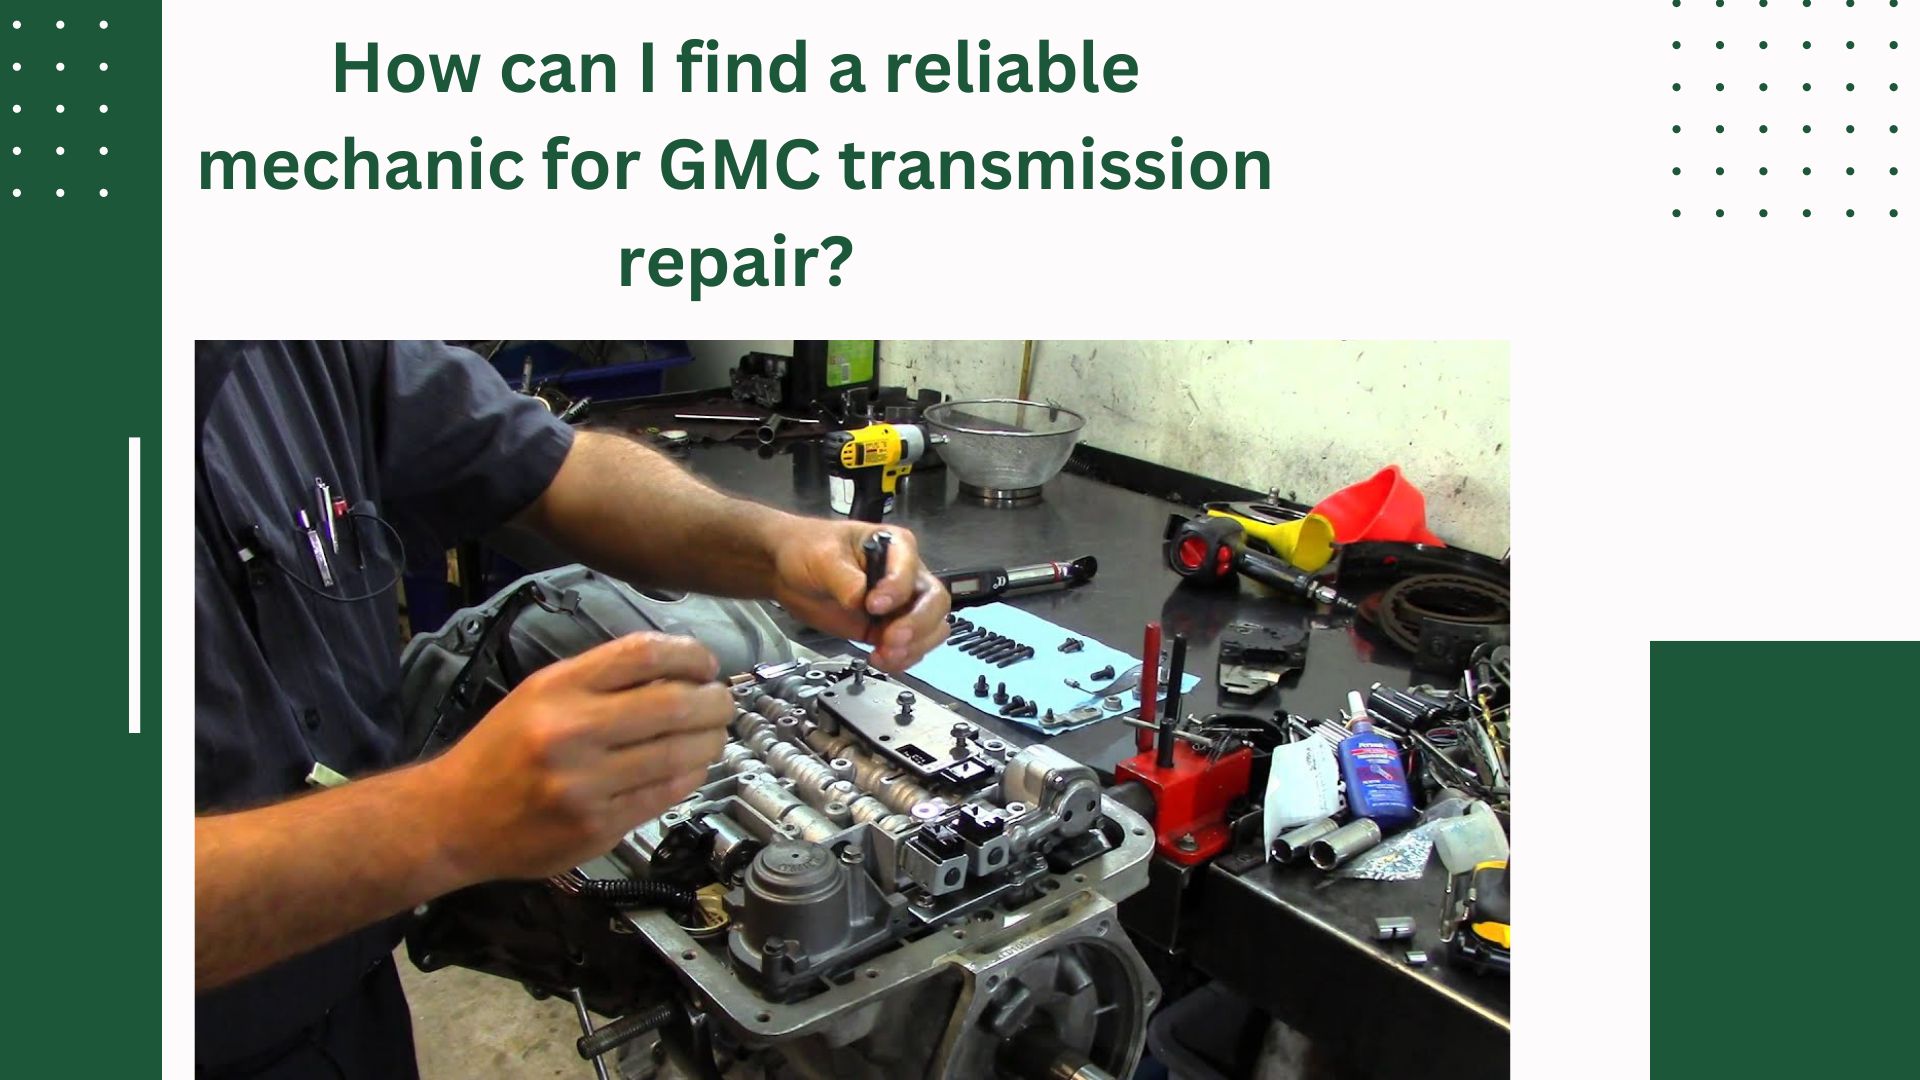 How can I find a reliable mechanic for GMC transmission repair?